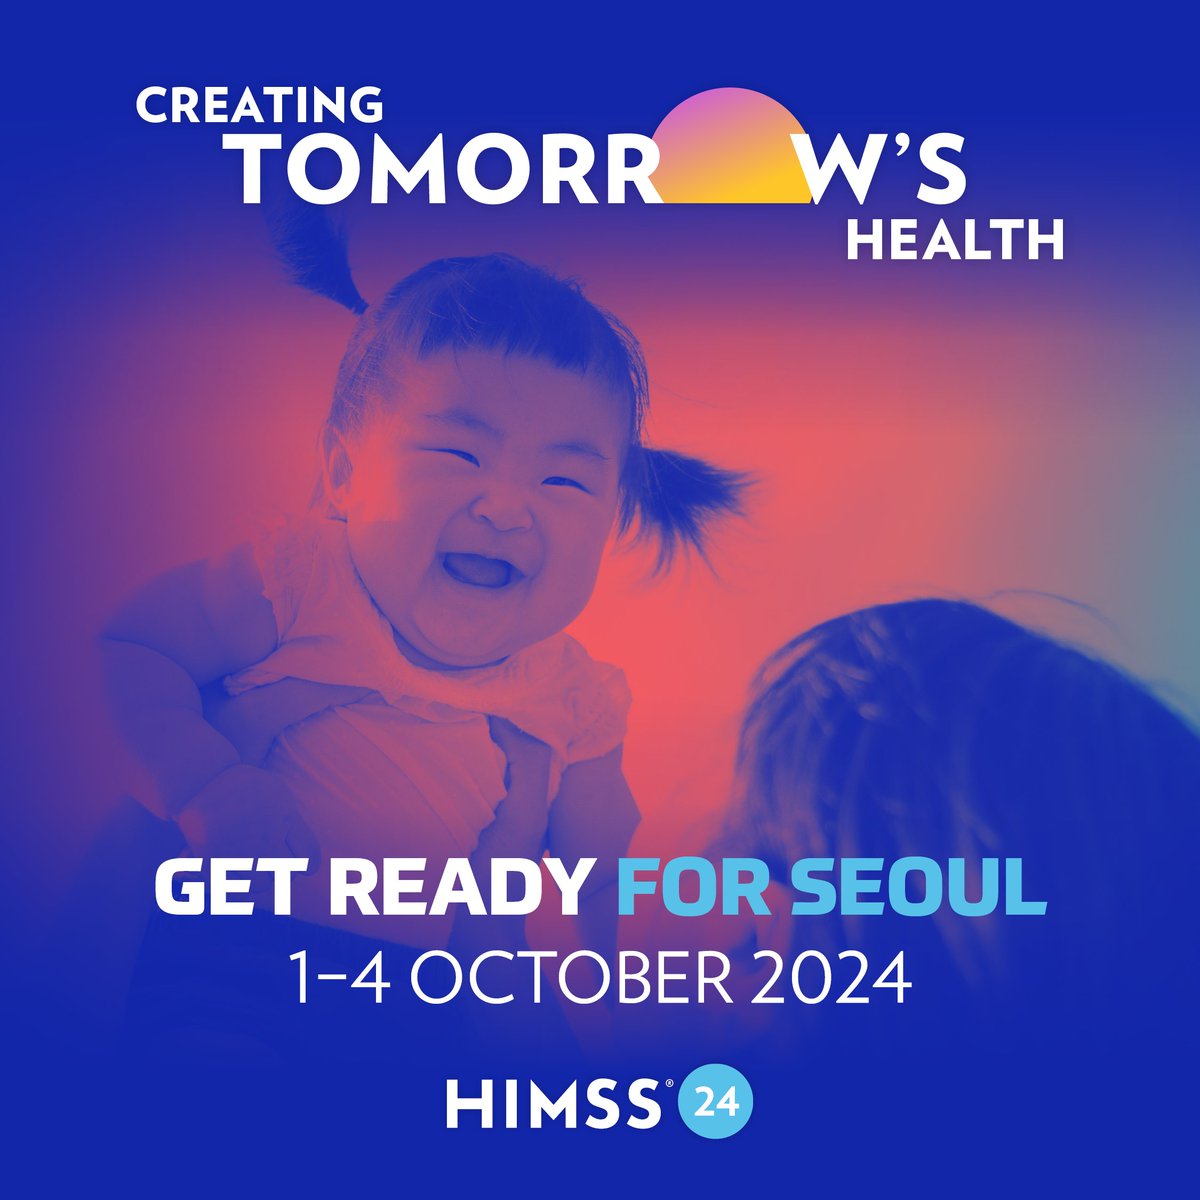 SEOUL excited to share that the HIMSS24 APAC Conference & Exhibition will be held in South Korea from October 1-4!

We'll be providing more details shortly, but thought you might just wanna first take note of the dates to block your calendar. GET EXCITED!

#HIMSS24APAC